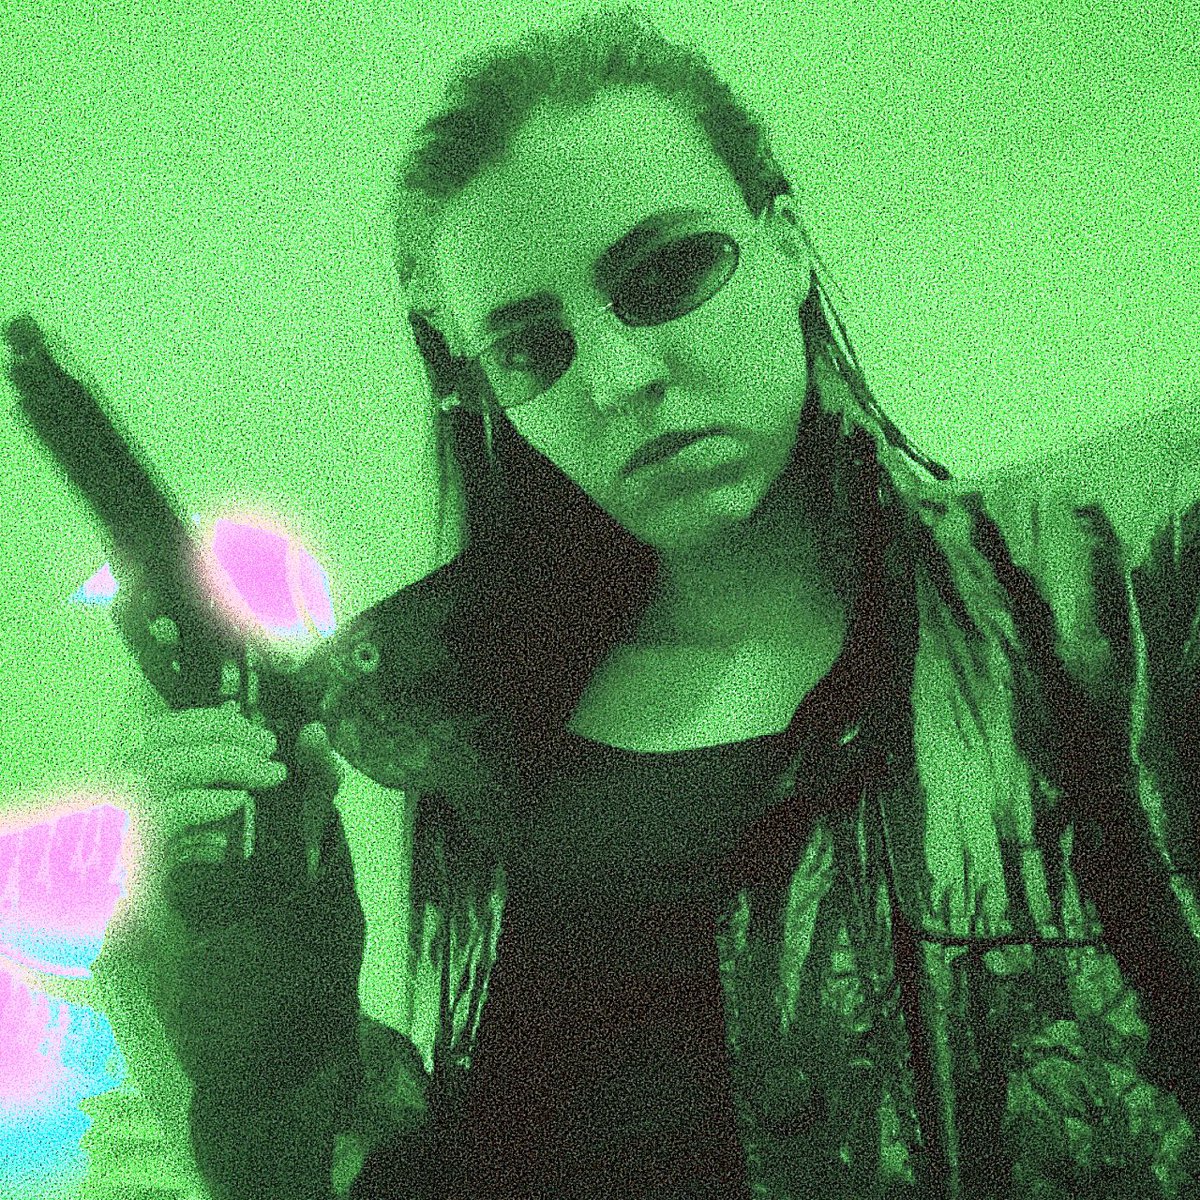 @DistantFoxx i dressed up like i was from the matrix one halloween